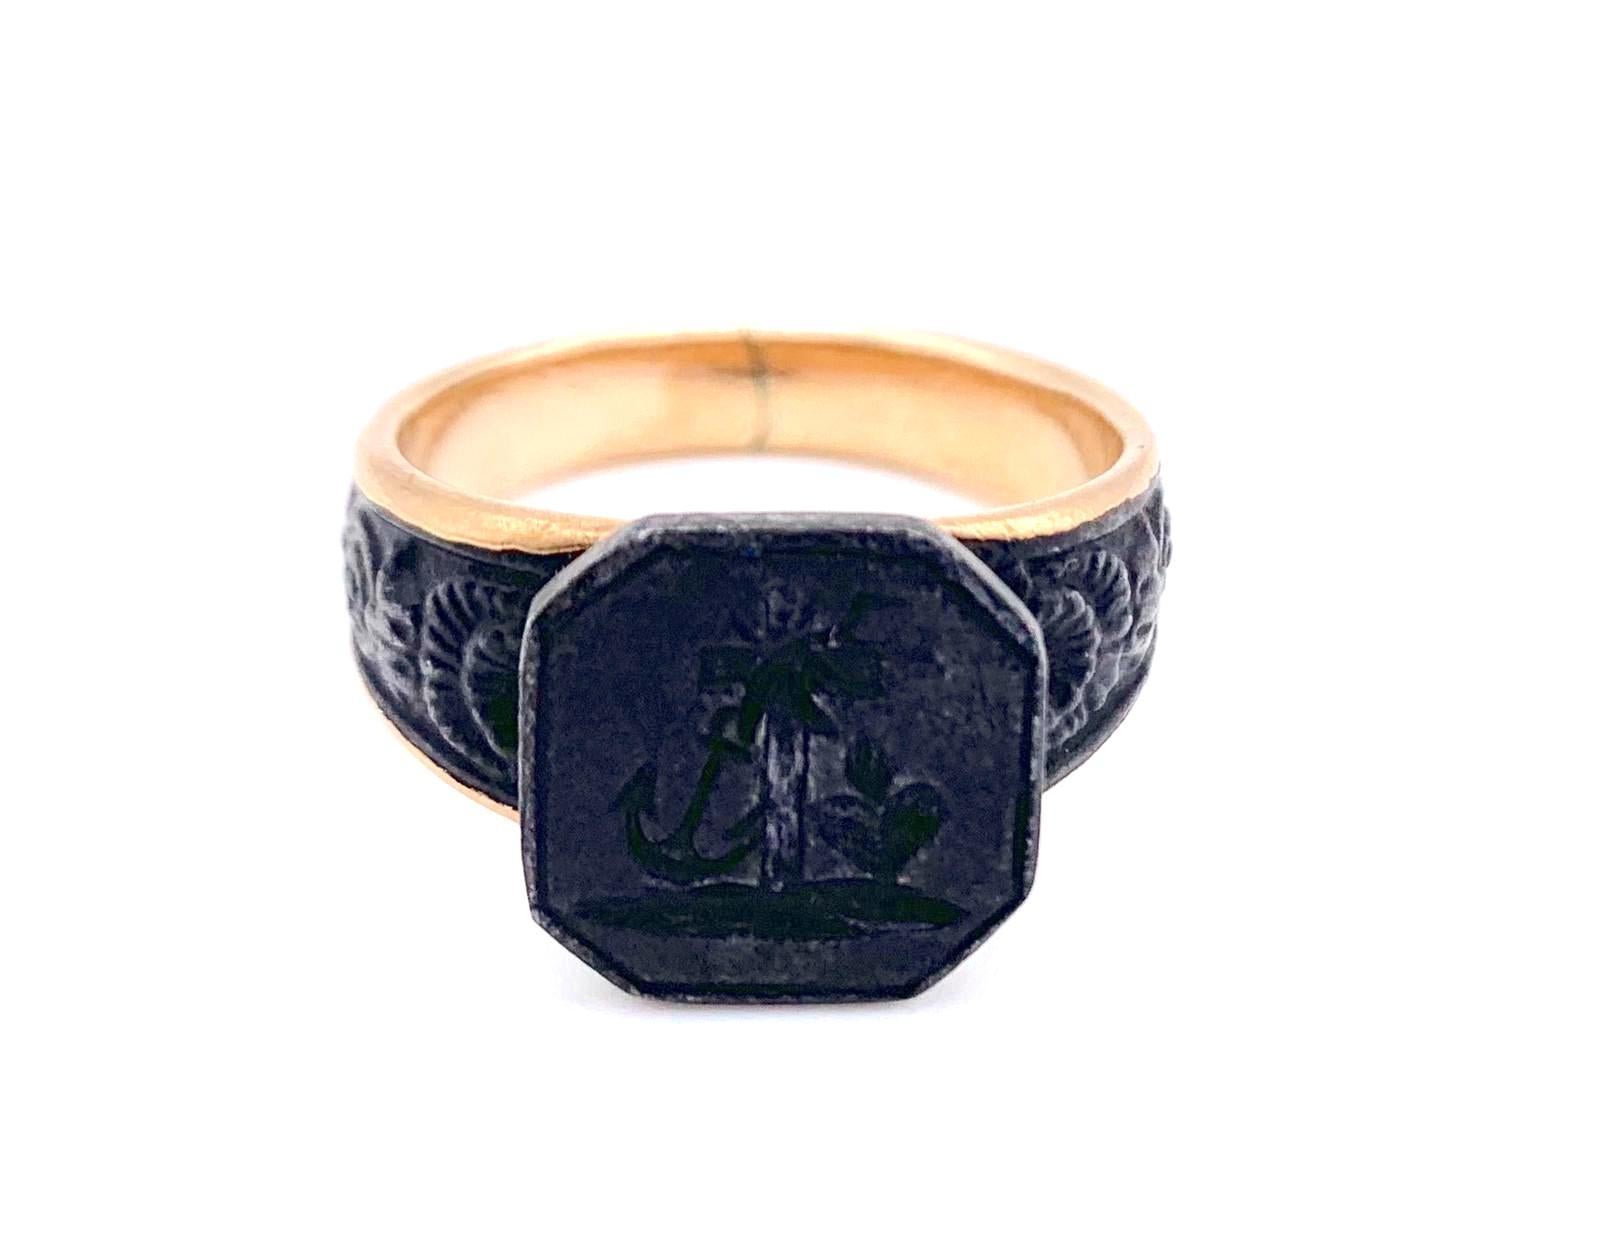 Hectagonal Signet Ring 
The ring head is decorated with a cross, an anchor and a flaming heart representing faith, hope and charity. The ring shoulders are decorated with scallops and flower garlands. The iron ring has been mounted onto a 9 k gold